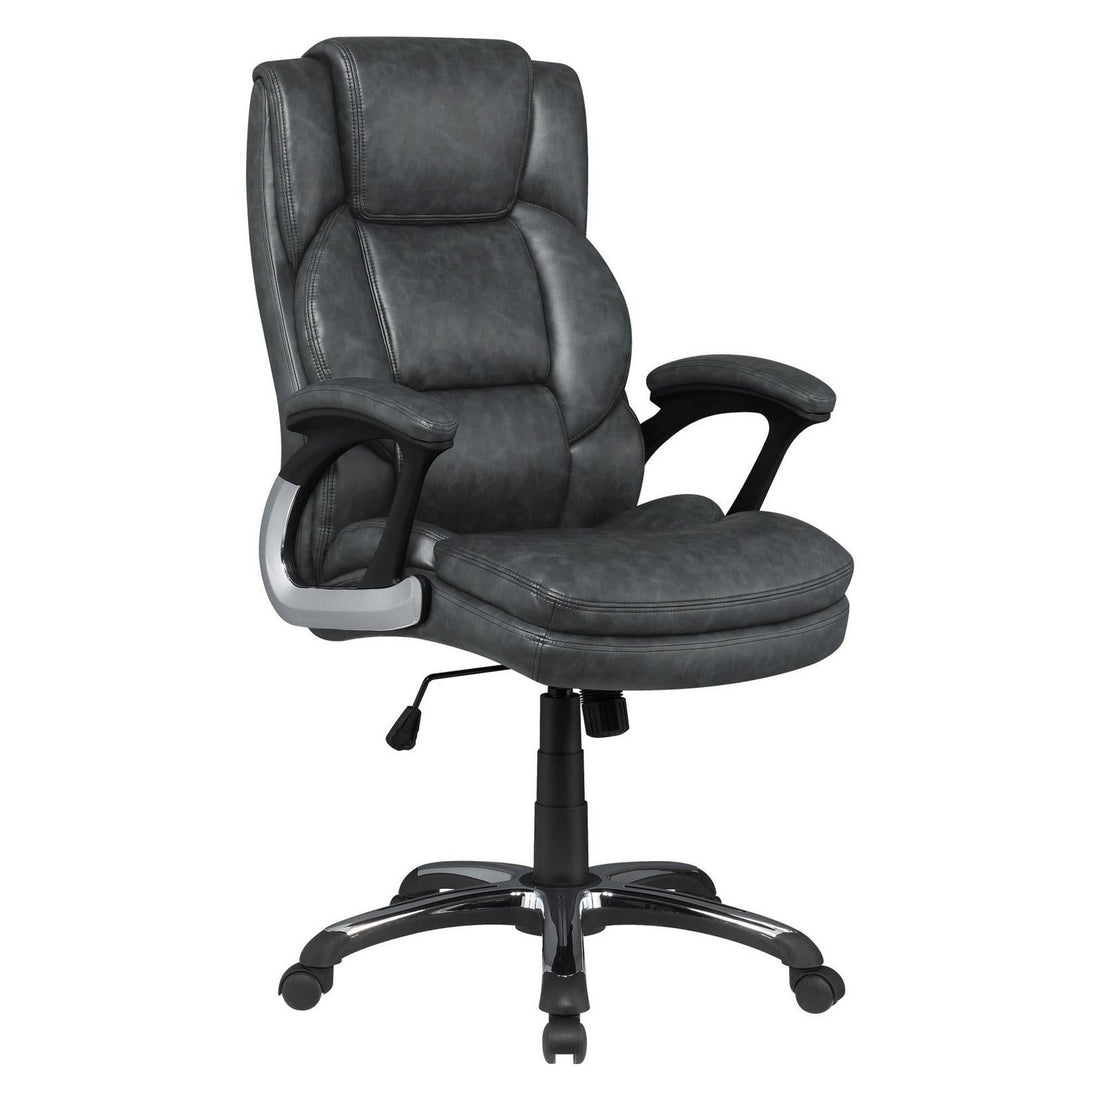 Nerris Adjustable Height Office Chair with Padded Arm Grey and Black 881183